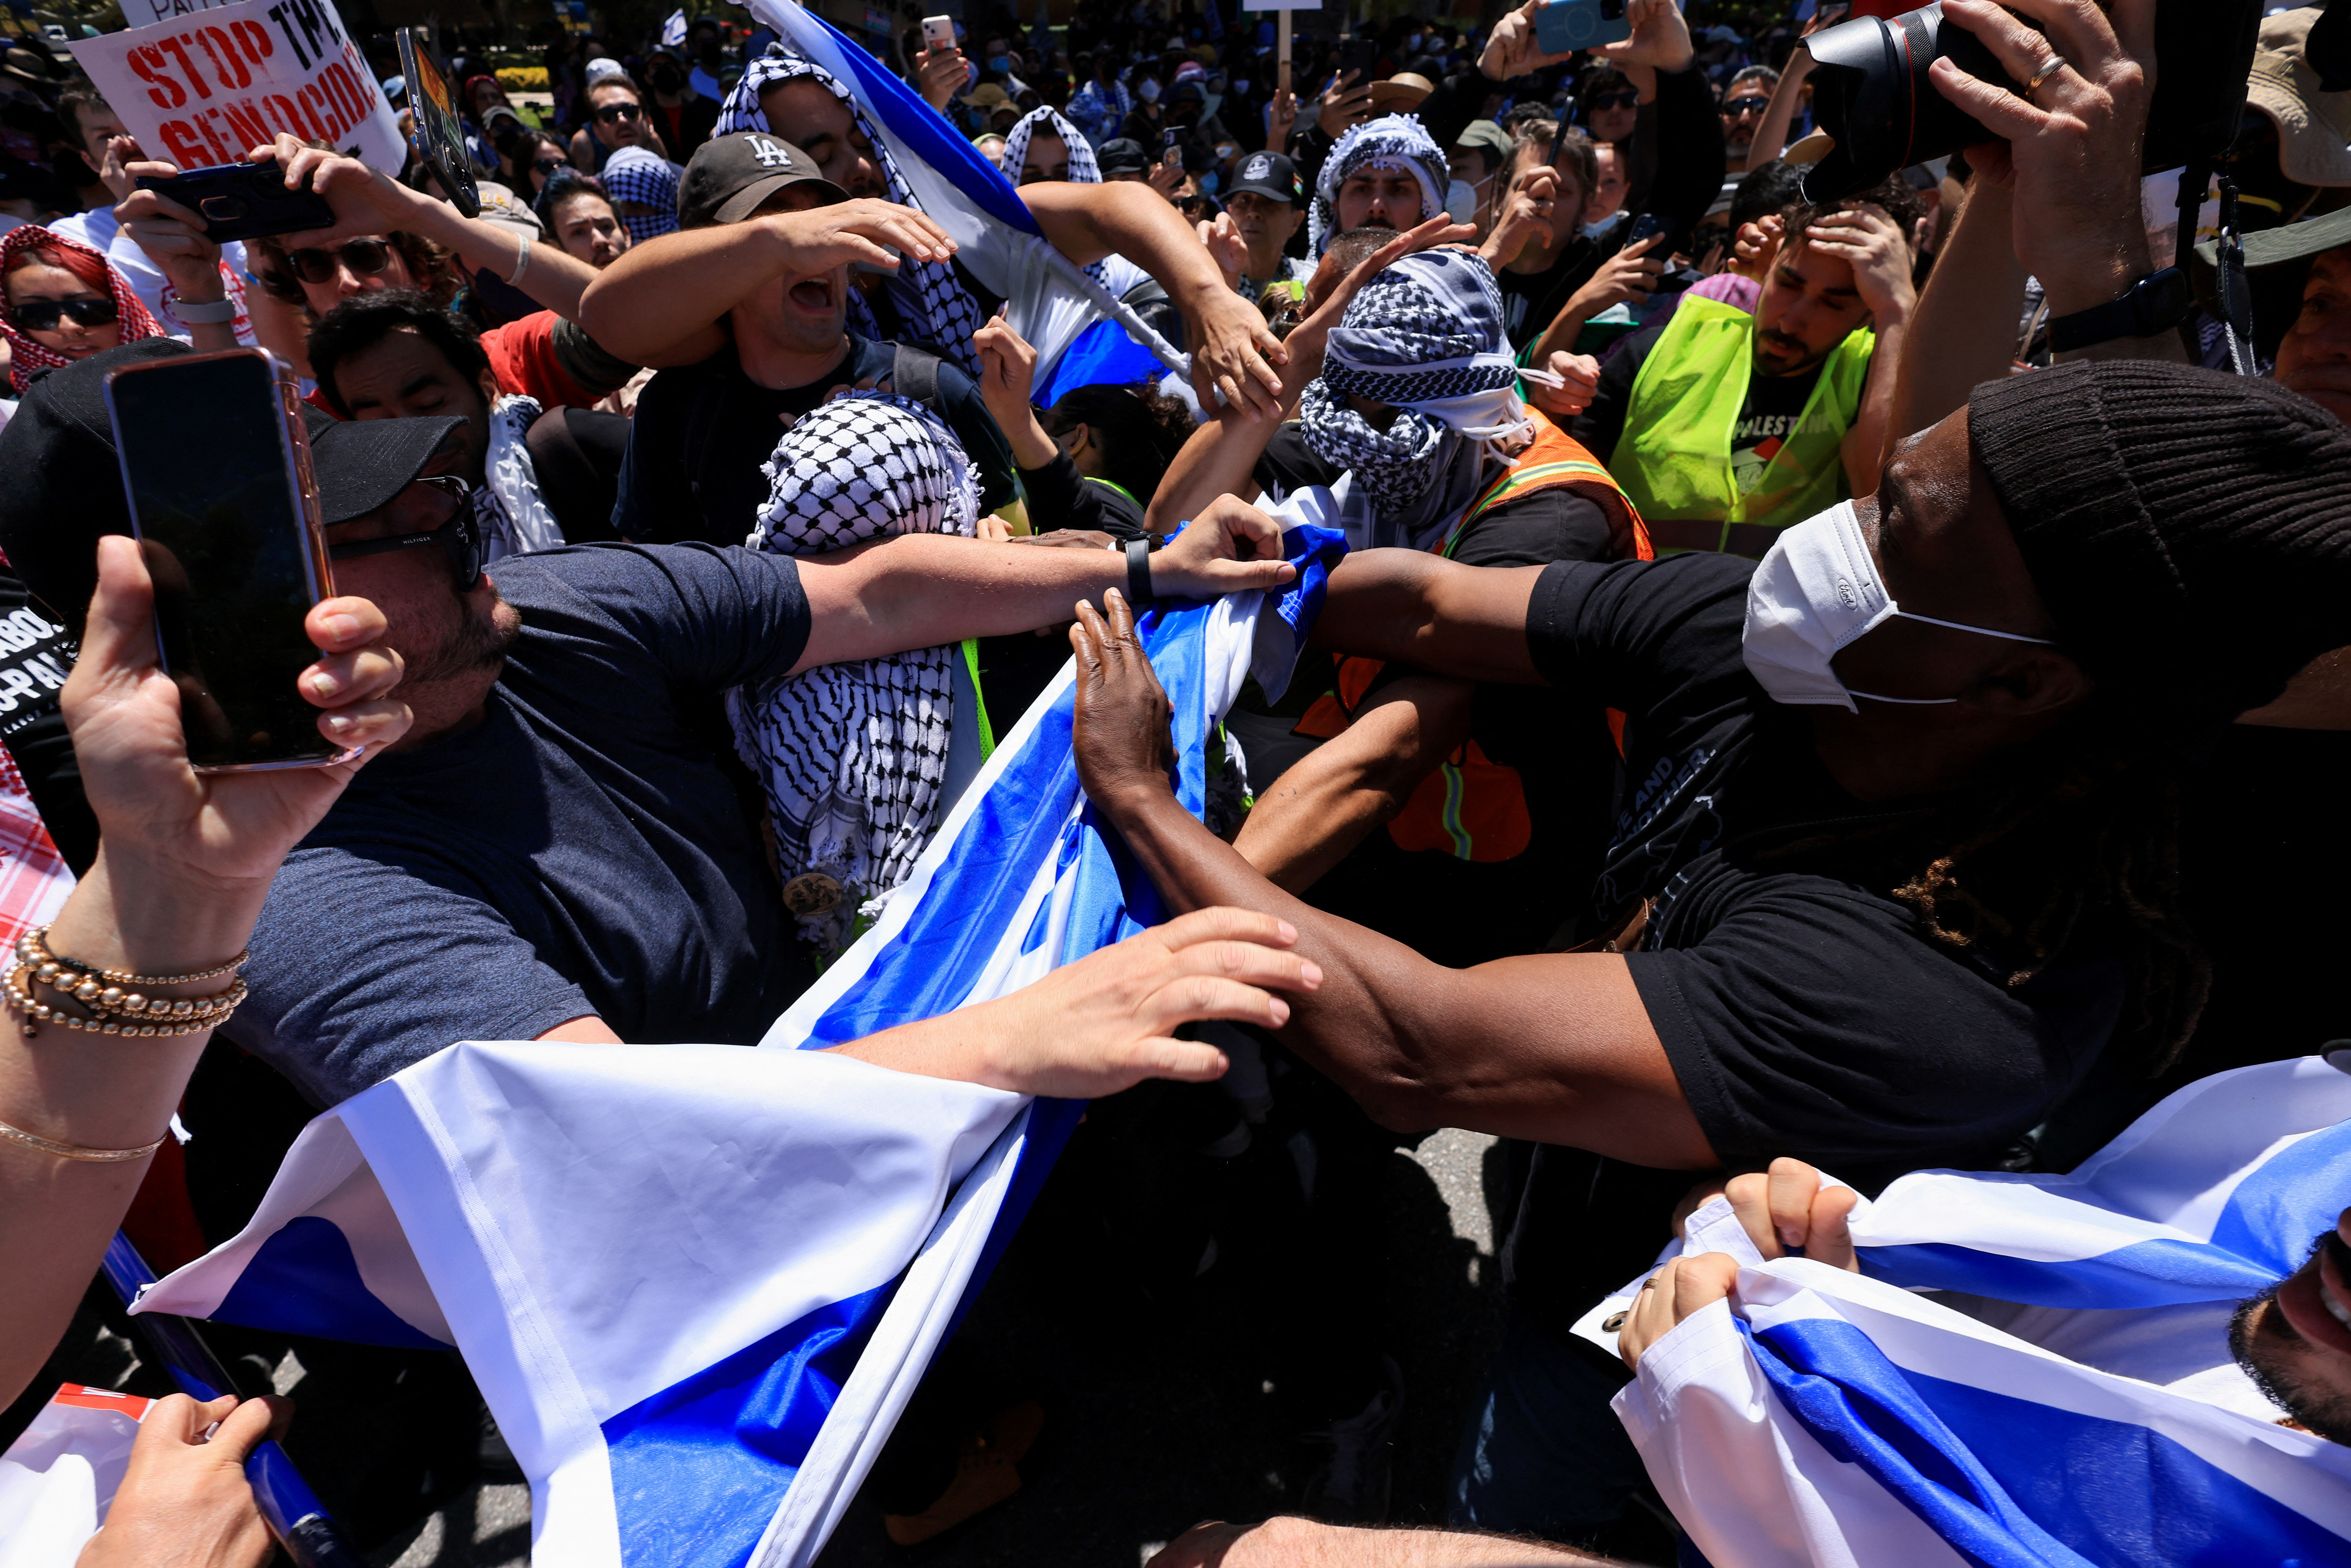 Protests amid ongoing conflict between Israel and Hamas, at the UCLA in Los Angeles